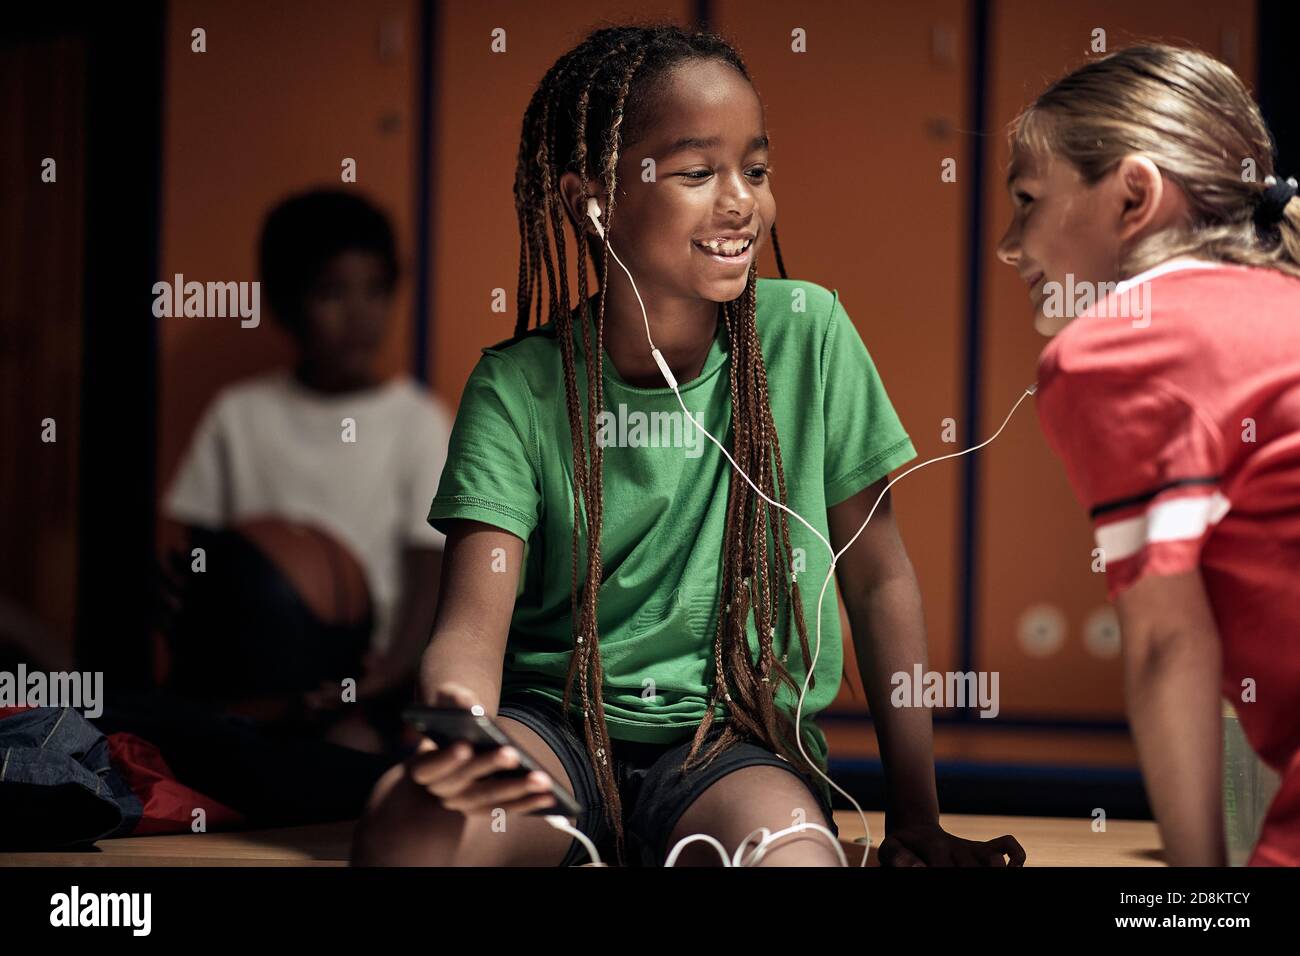 Kids listening to the music while waiting for a training at the locker room. Children team sport Stock Photo